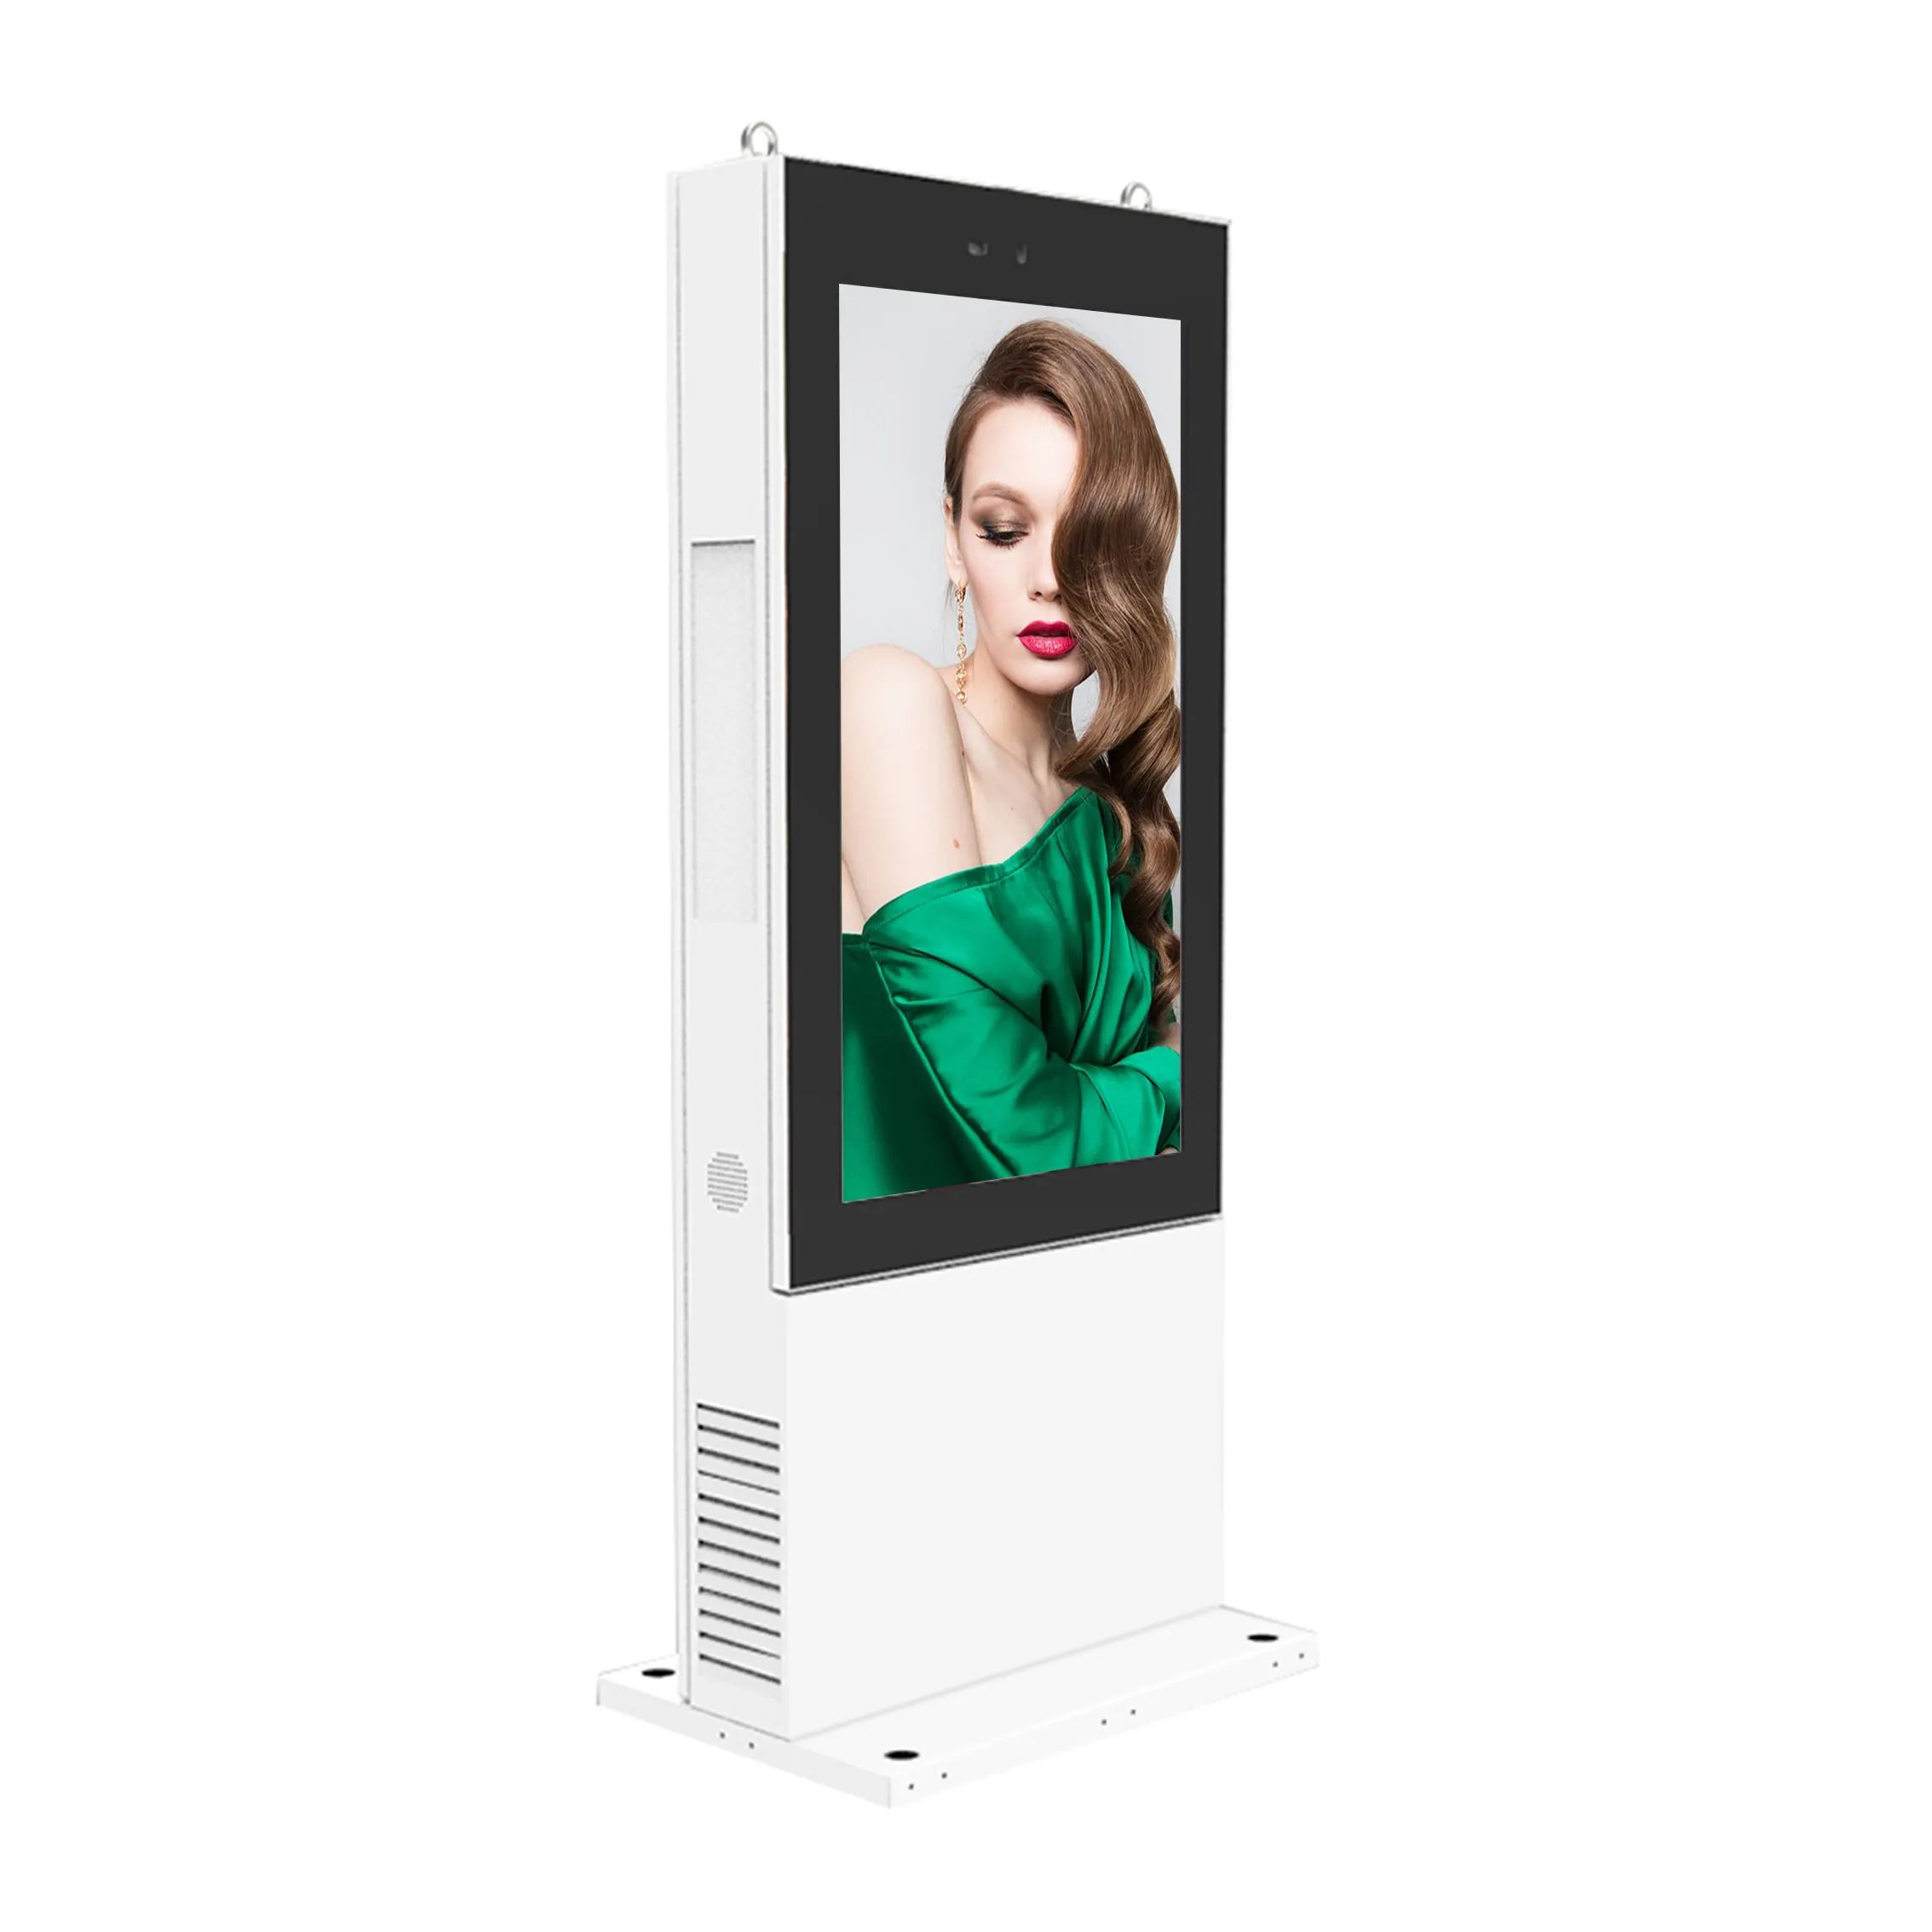 Low Price 55inch Solar Advertising Display Outdoor Digital Signage Screen Totem With Lcd Display Floor Stand For Outdoor